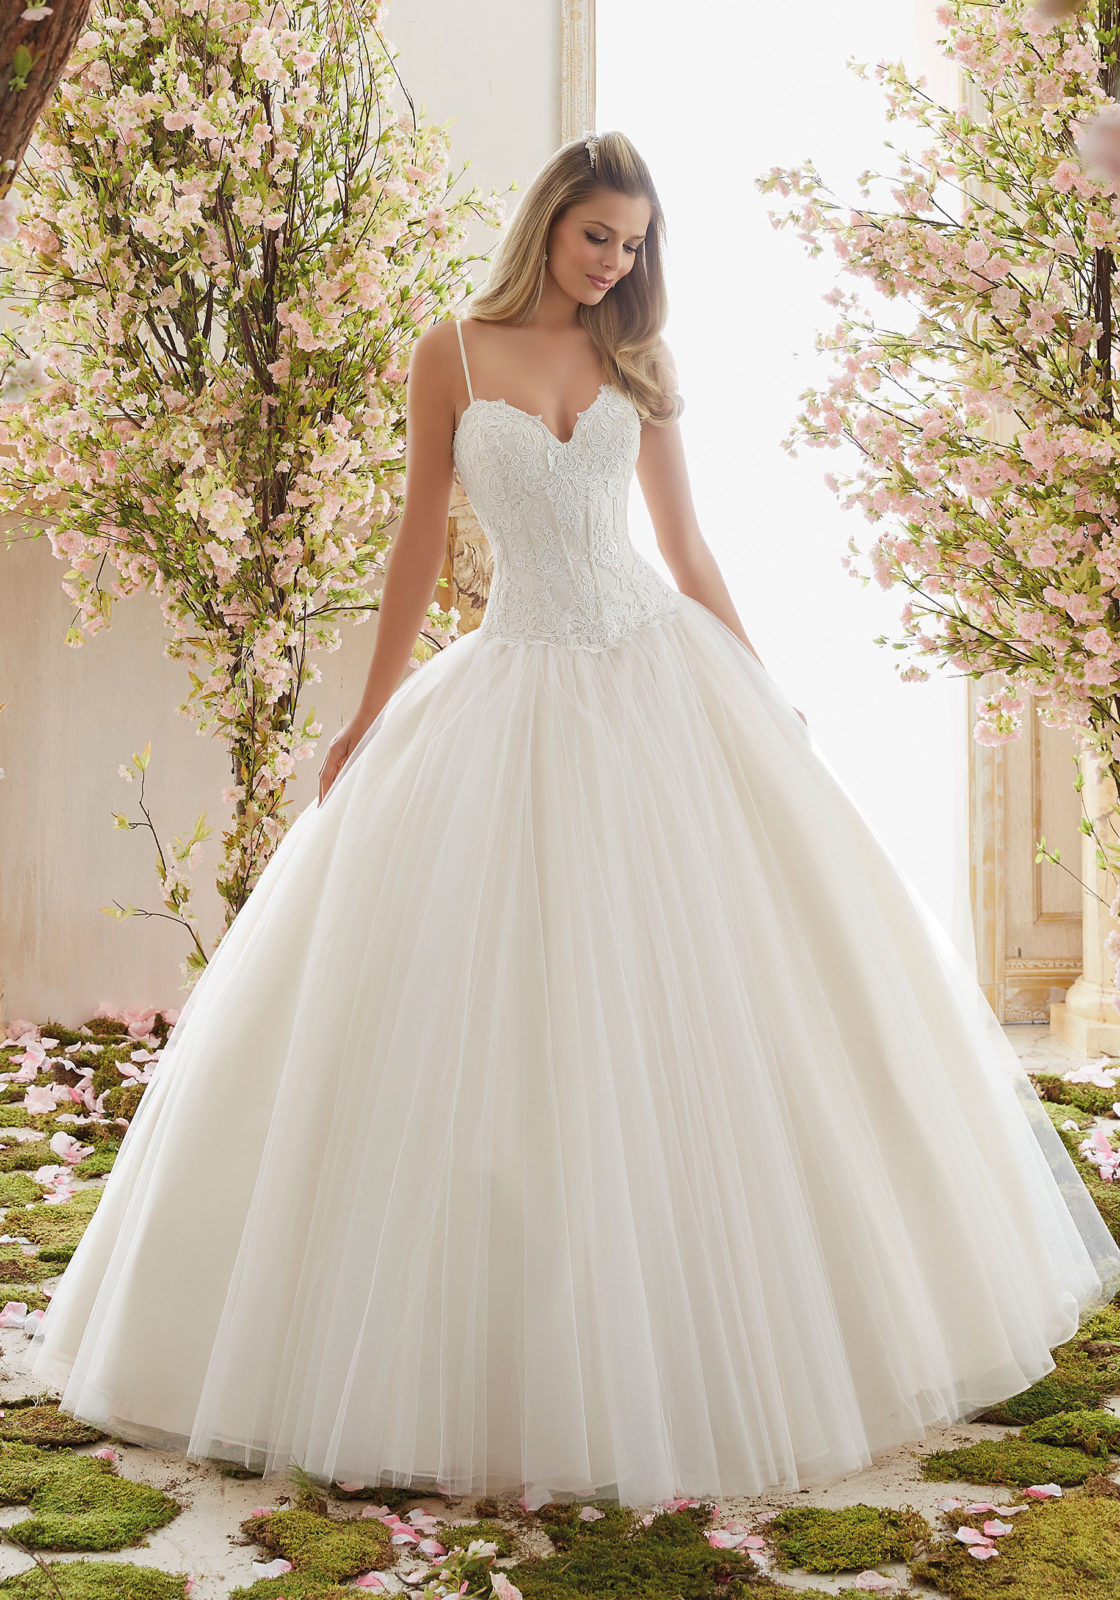 Tulle Ball Gown Wedding Dress
 Chantilly Lace on Tulle Ball Gown Wedding Dress